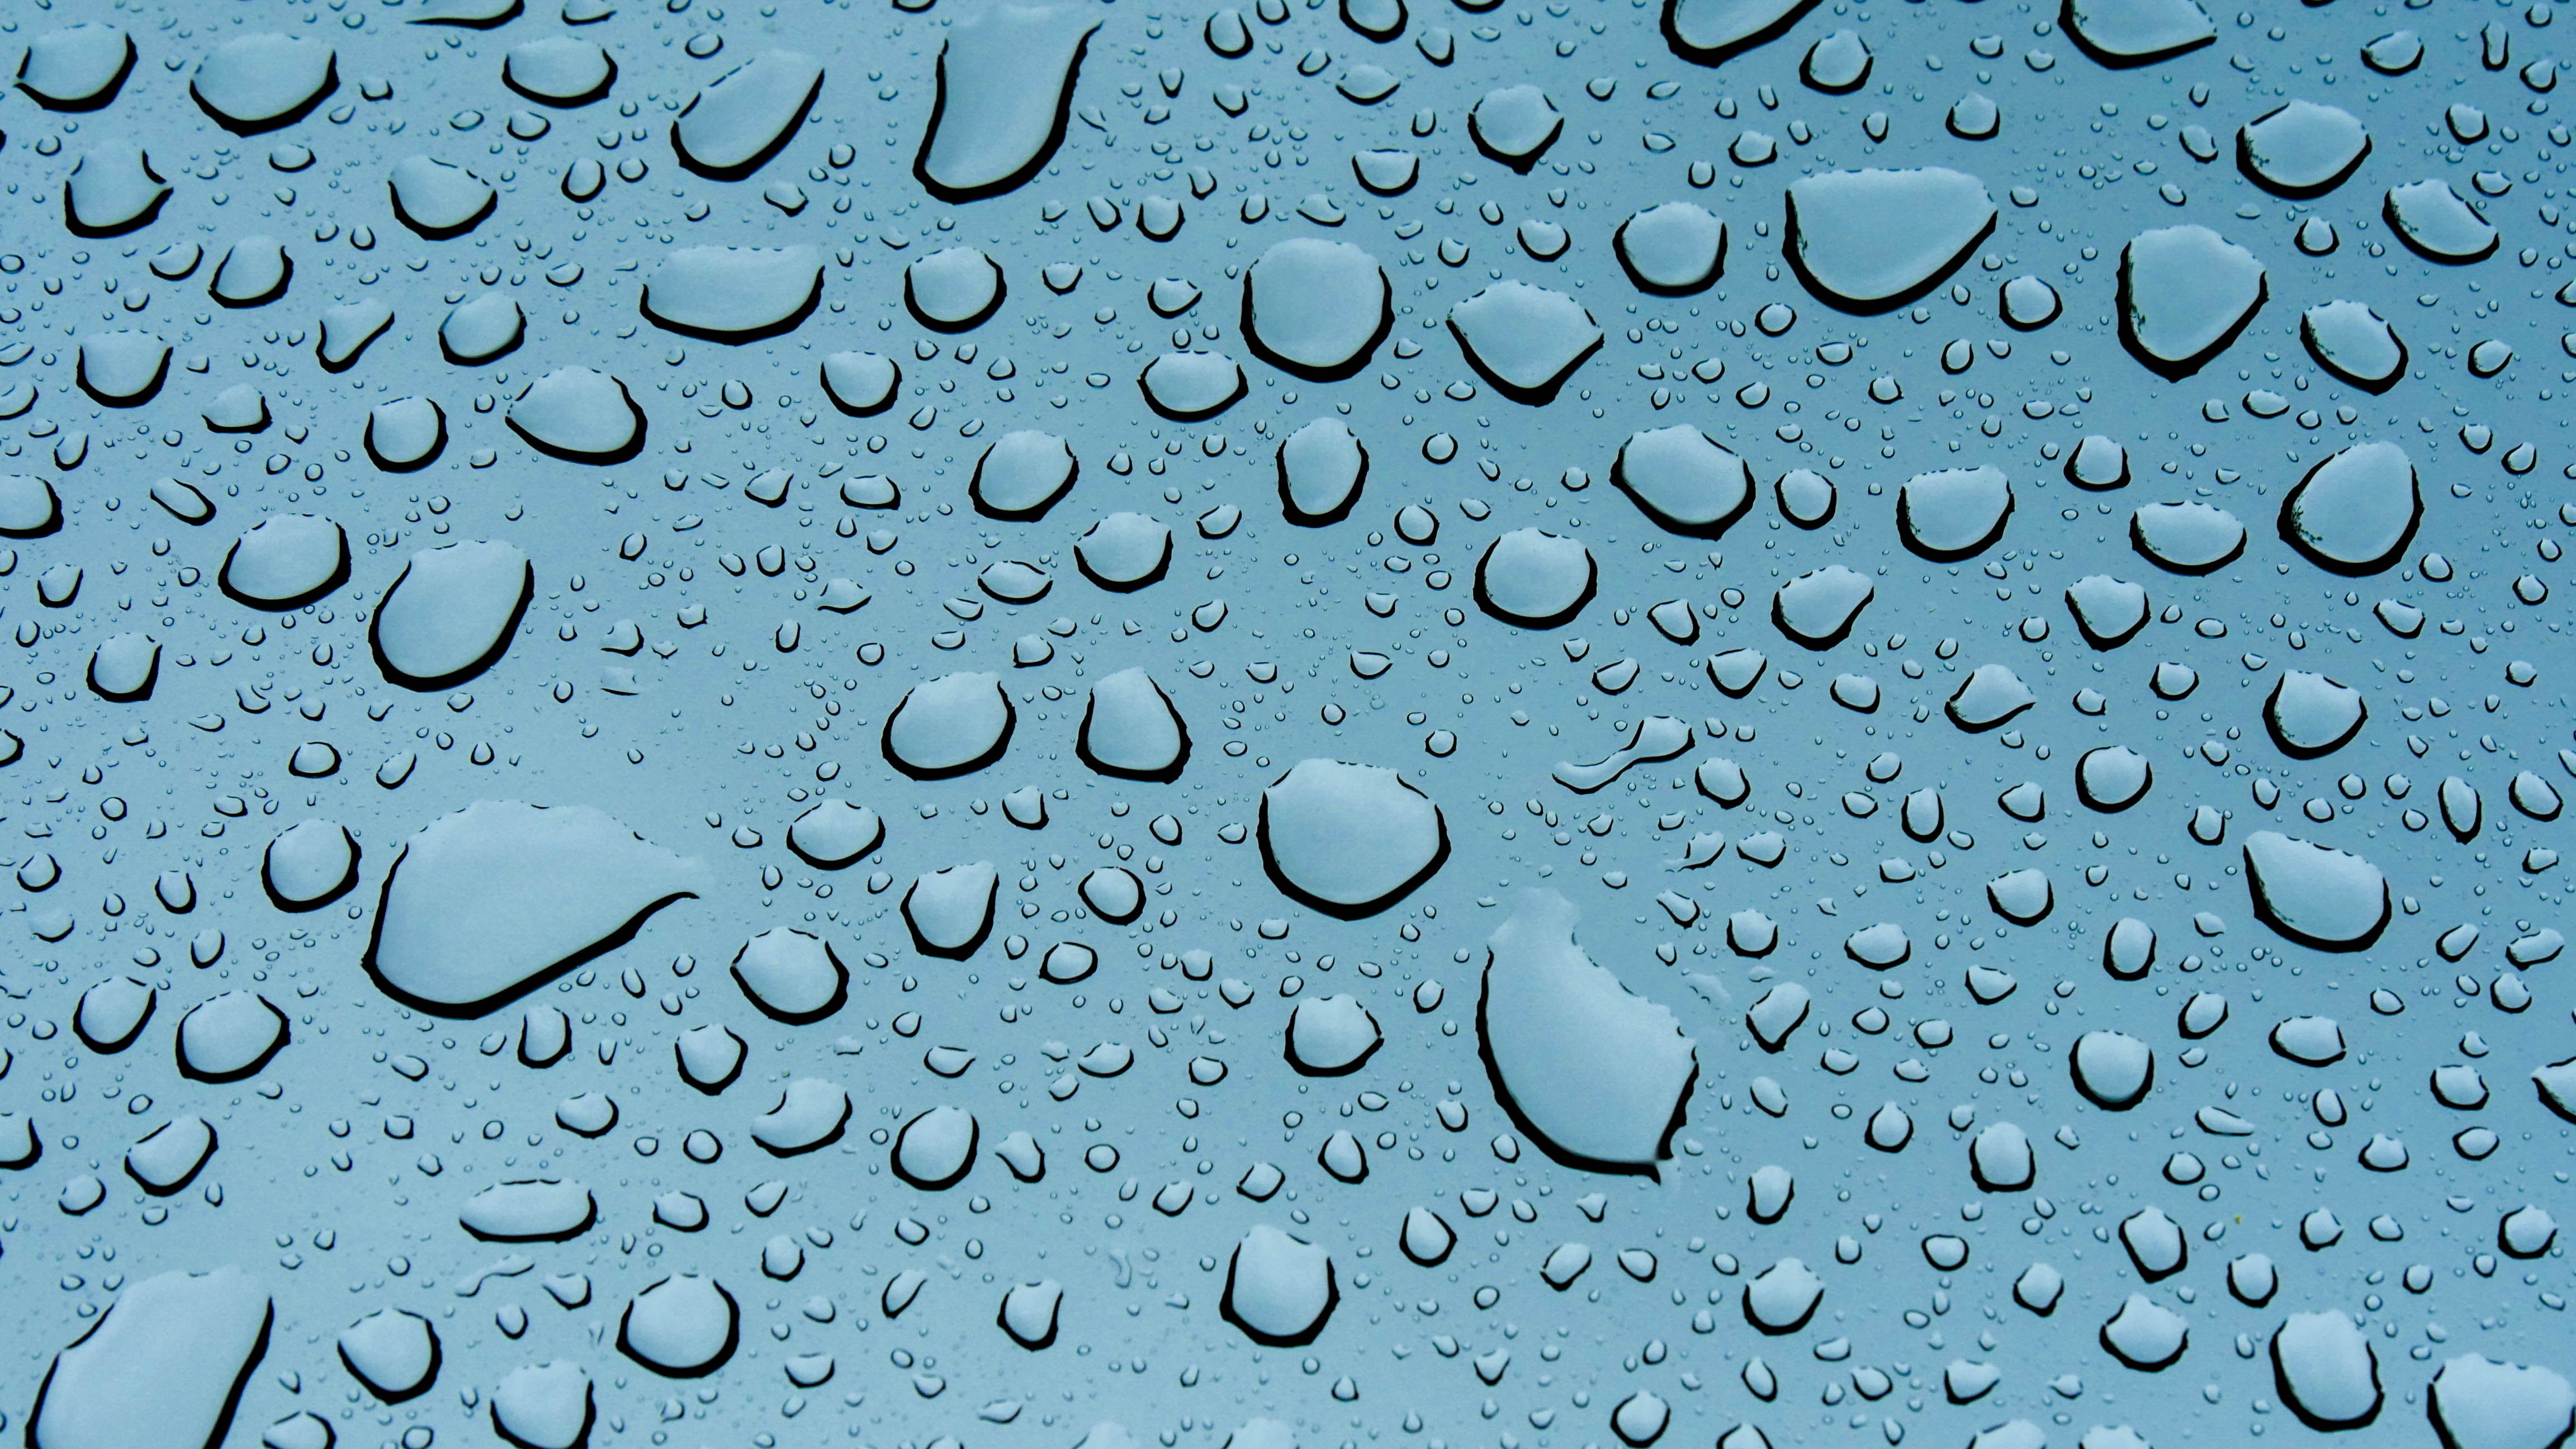 Ac Tune-up water droplets on glass